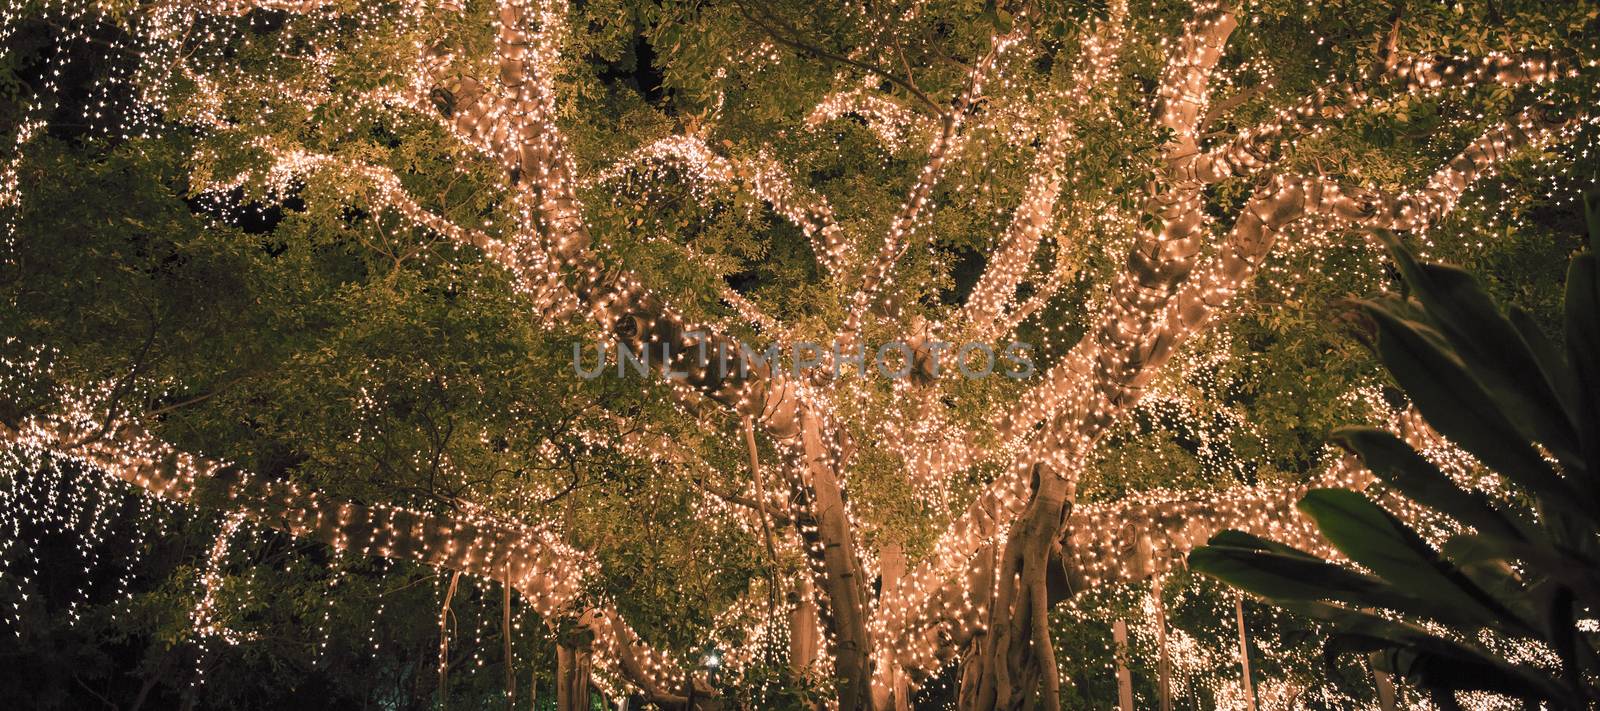 Large beautiful tree located in Brisbane City covered in spectacular golden lights.